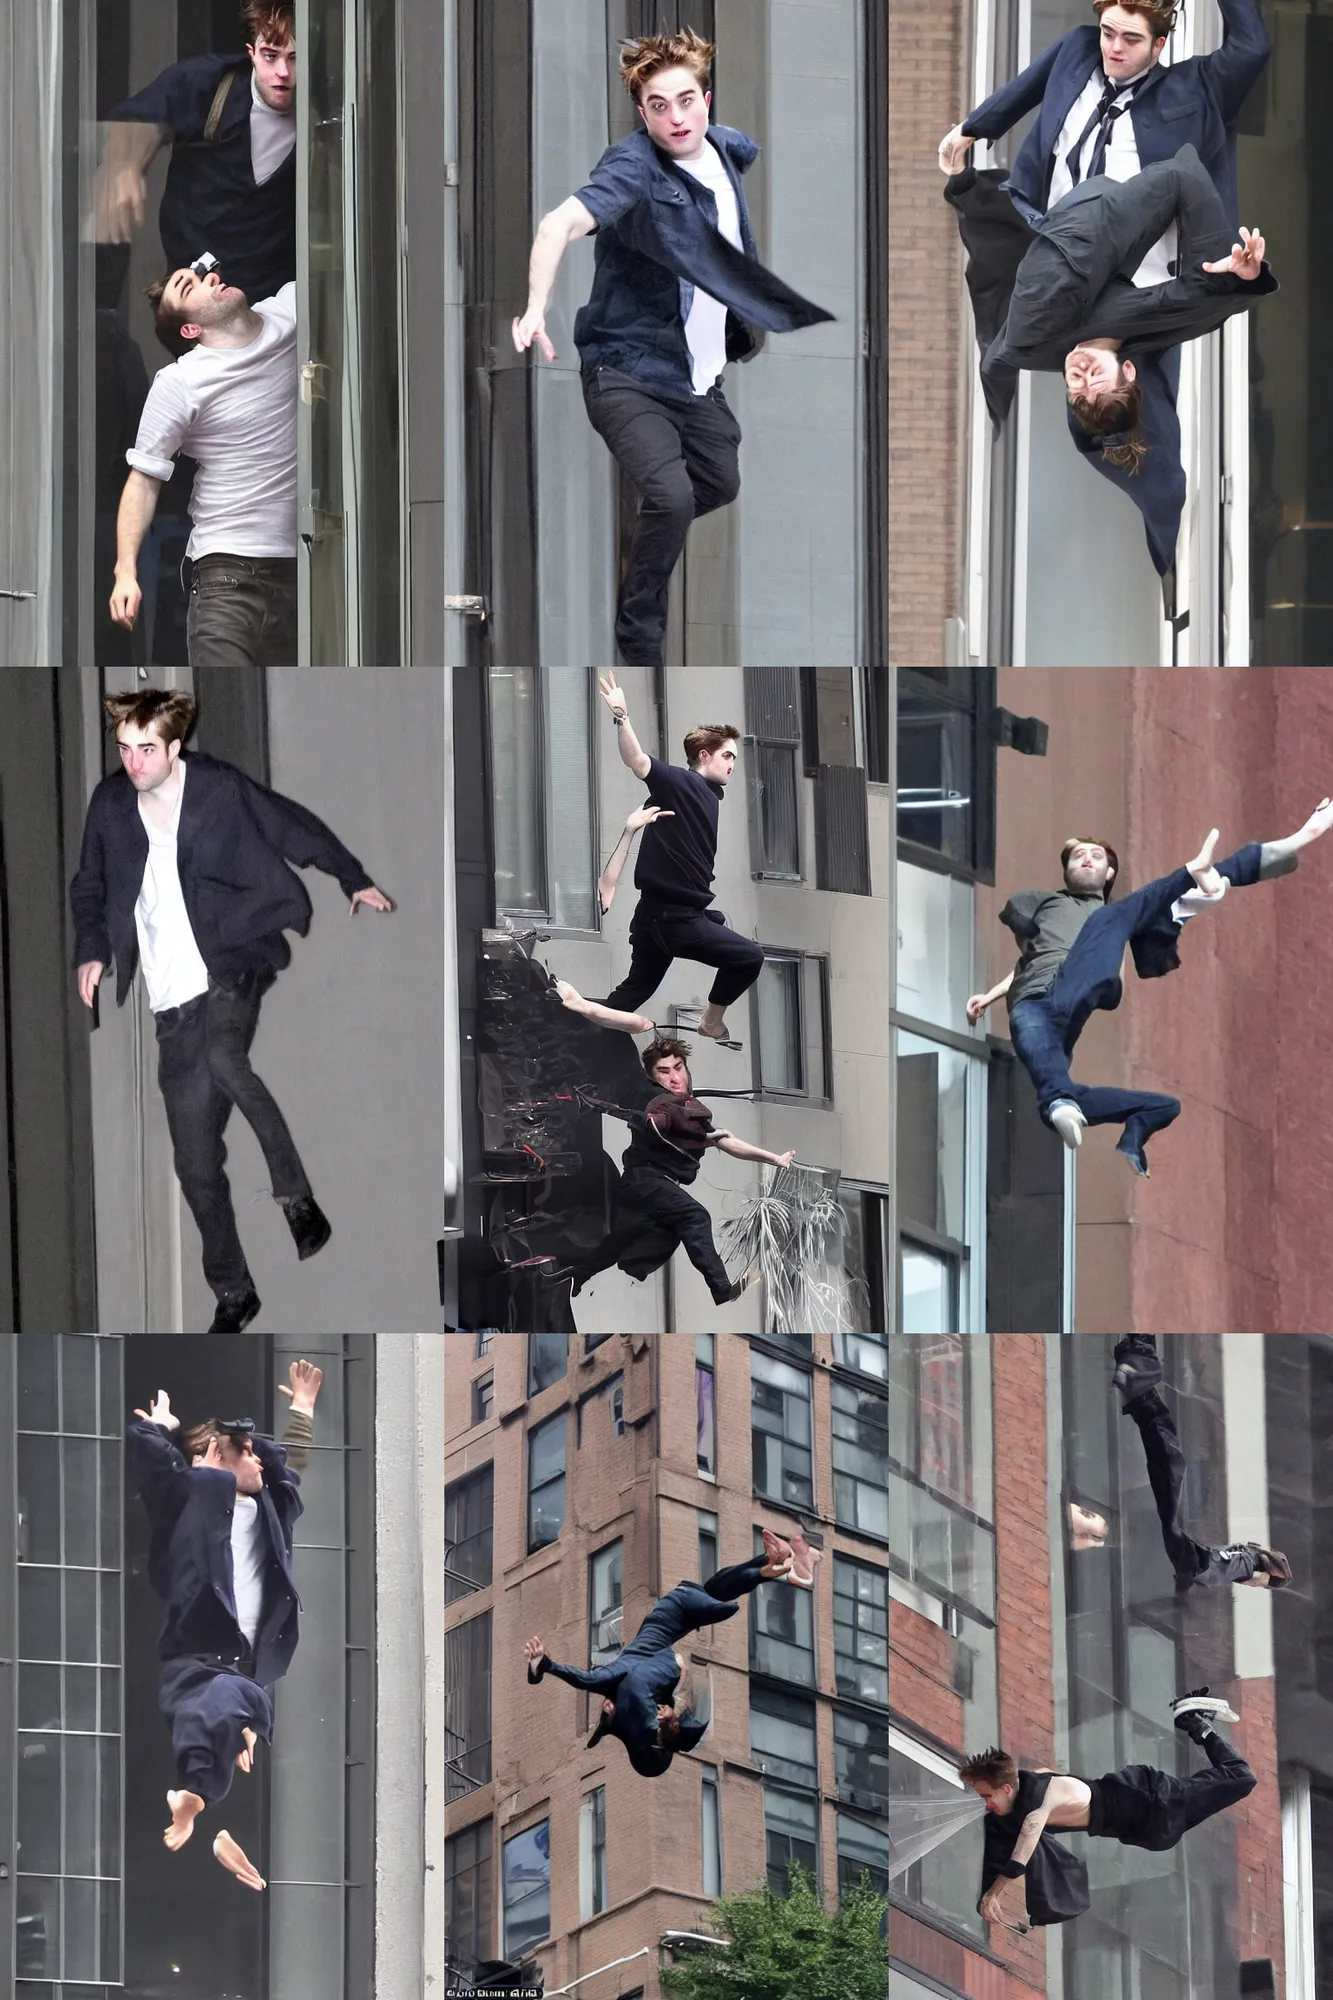 Prompt: robert pattinson's unconscious body flying into apartment window in new york city, photographed mid - air